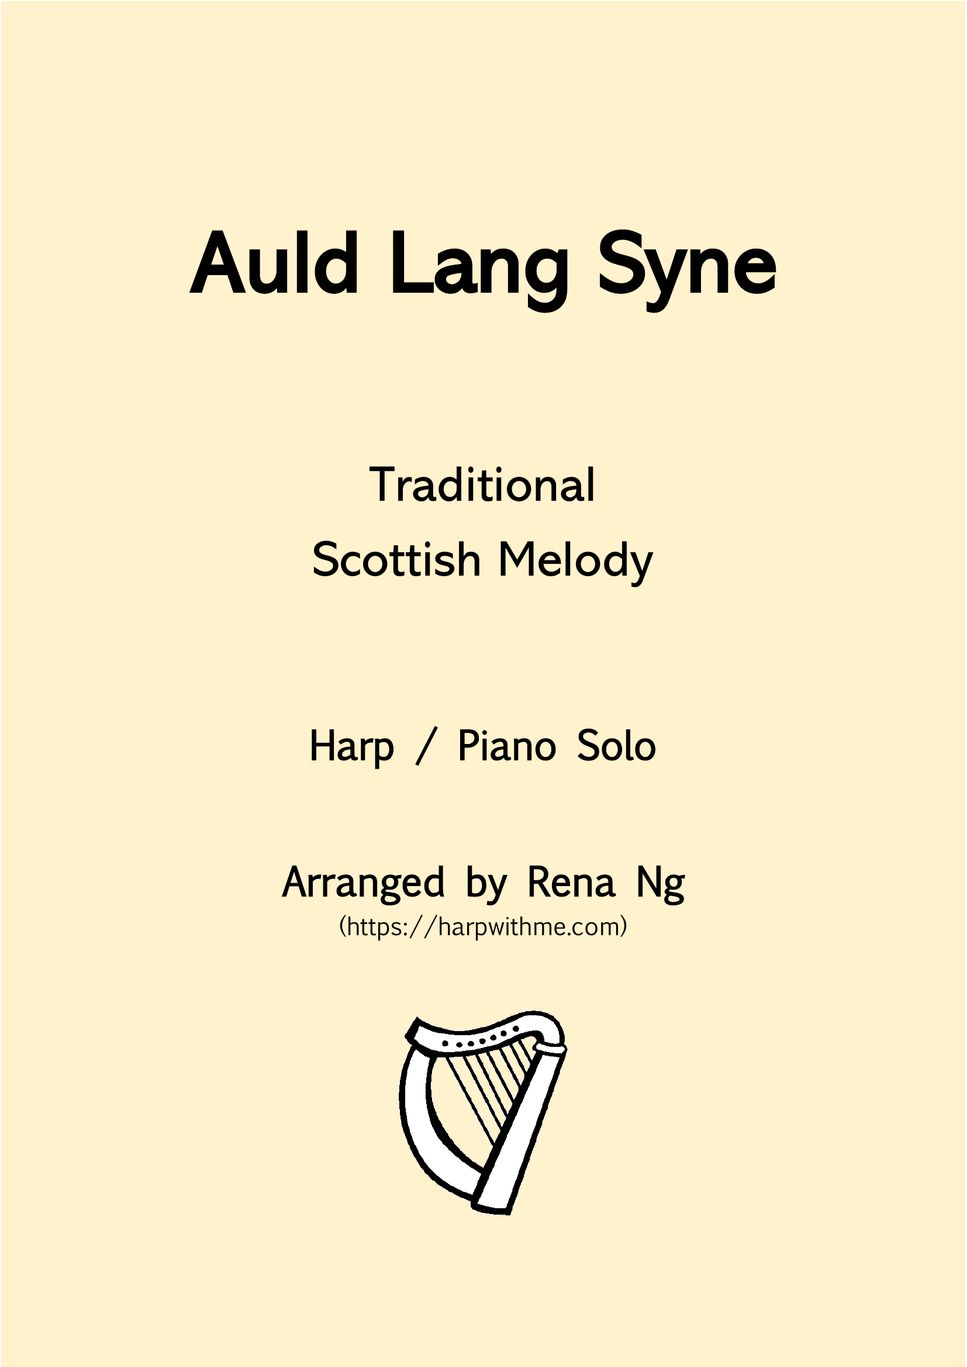 Auld Lang Syne (Harp / Piano Solo) - Intermediate by Harp With Me